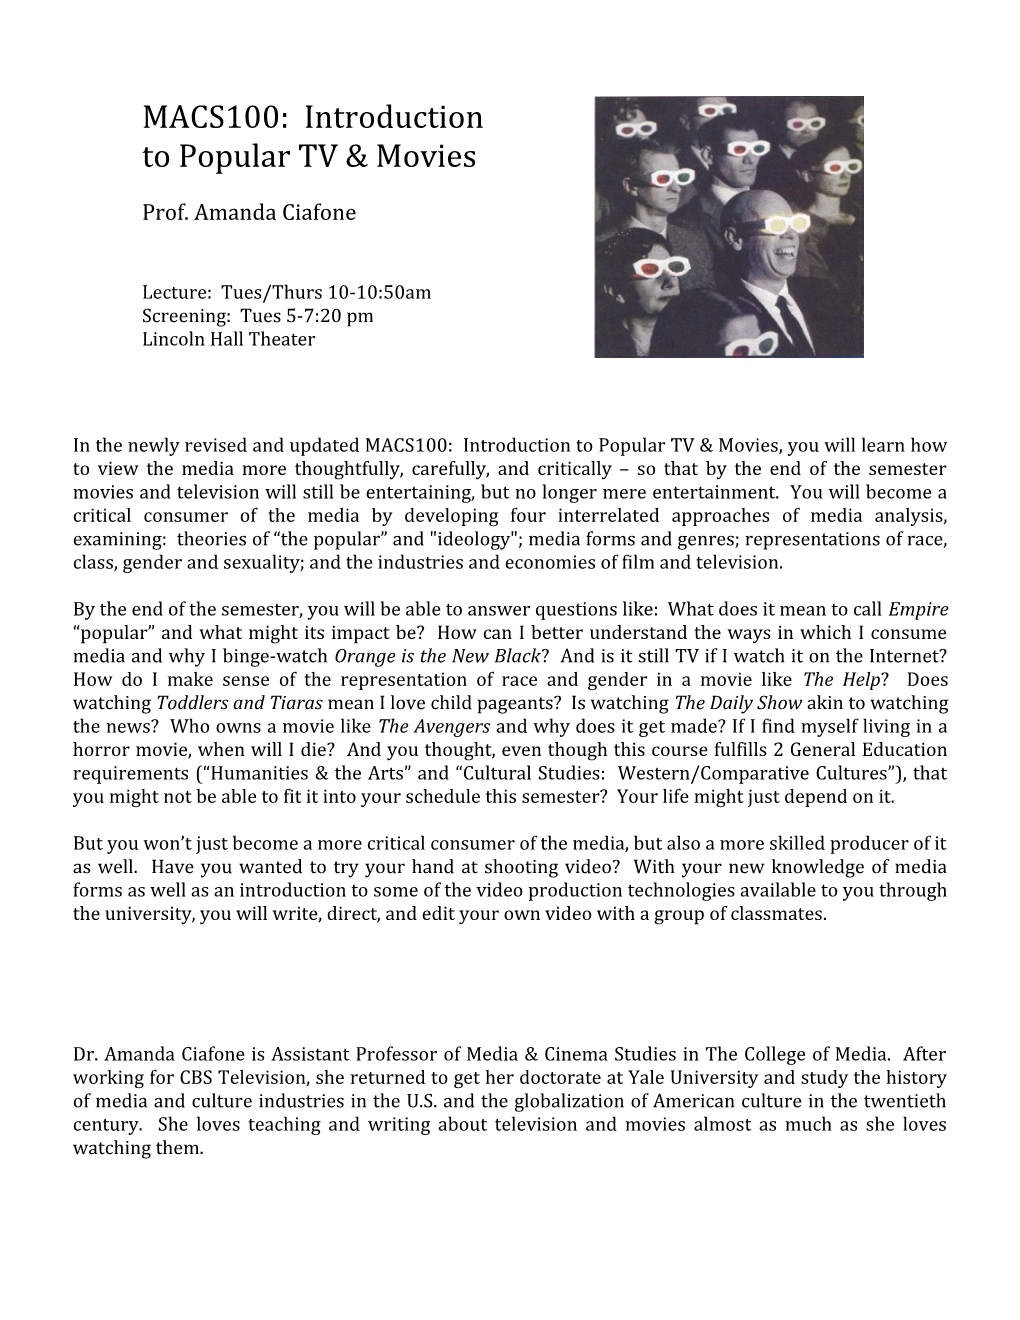 In the Newly Revised and Updated MACS100: Introduction to Popular TV & Movies, You Will